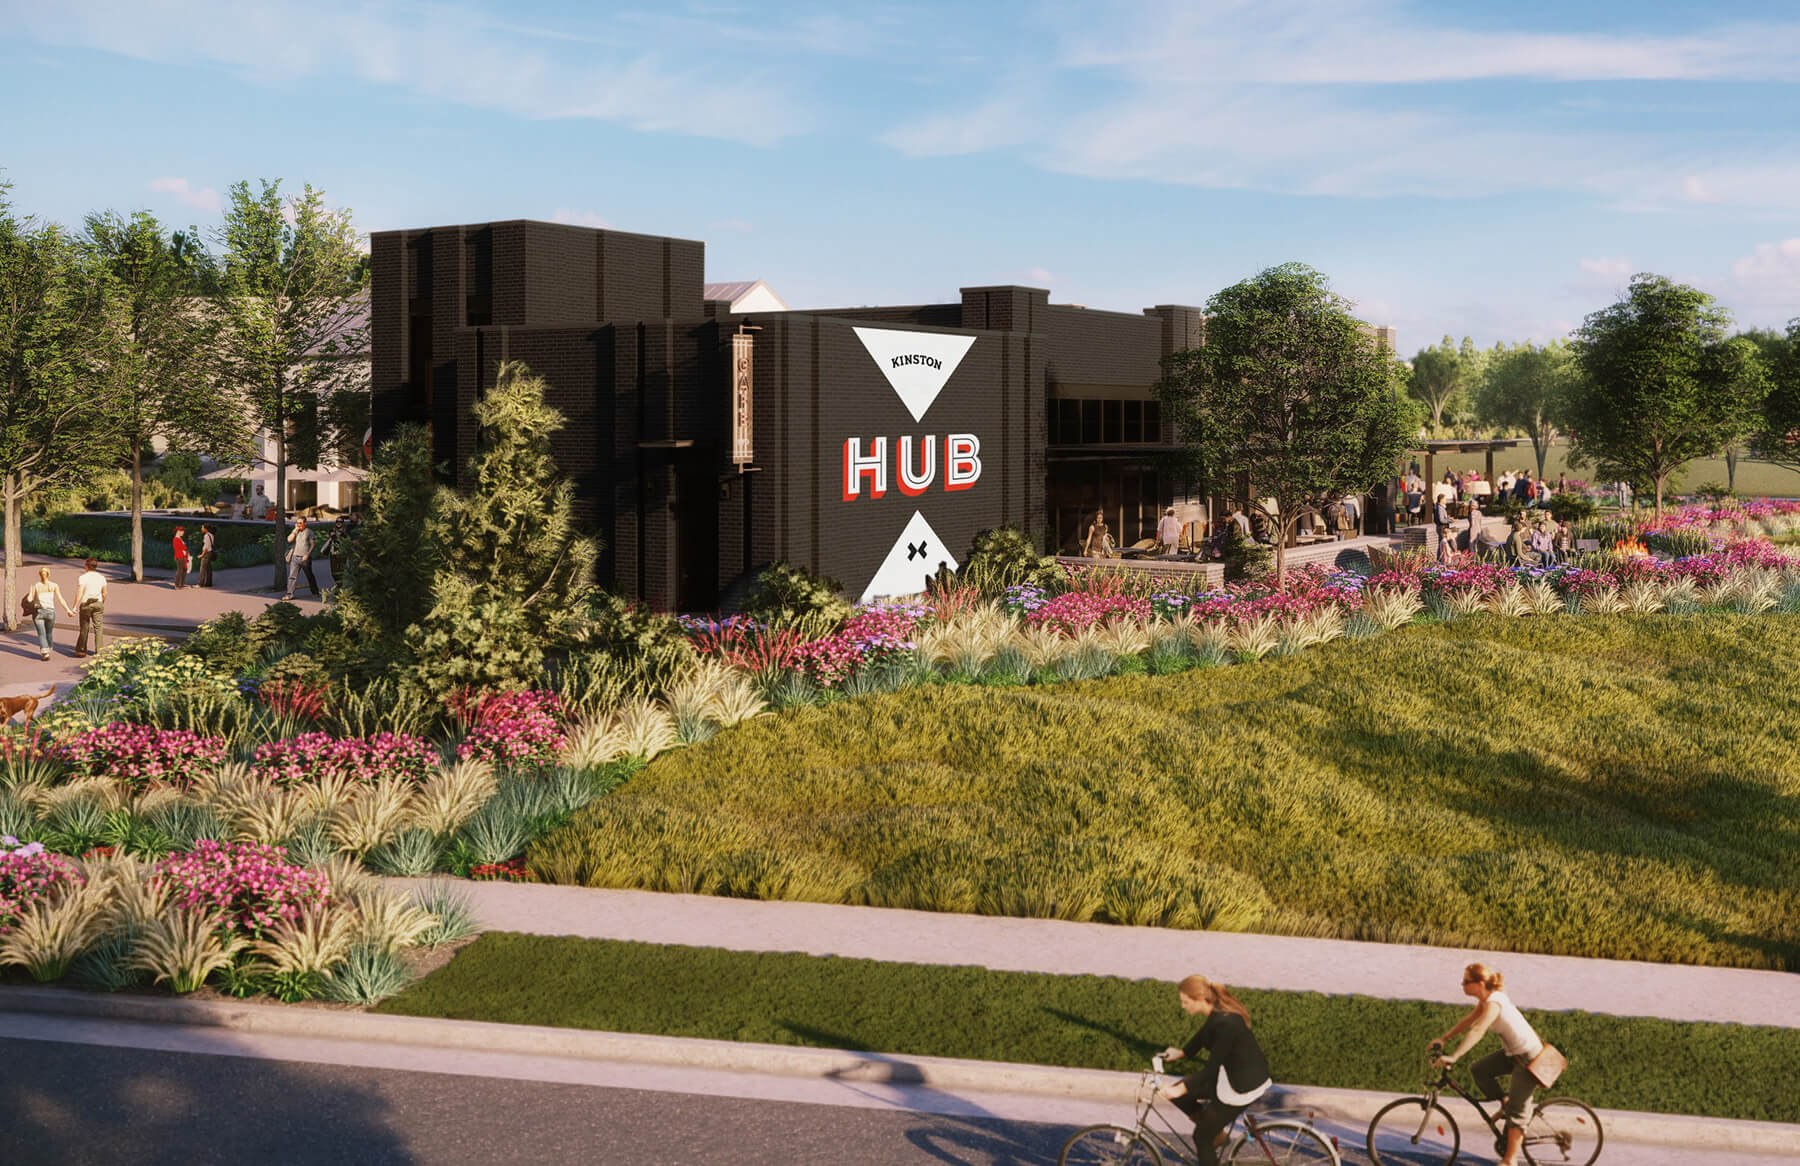 Exterior rendering of the community's welcome center, Kinston Hub, showcasing a mural painted on the side, nice landscaping and people riding bikes